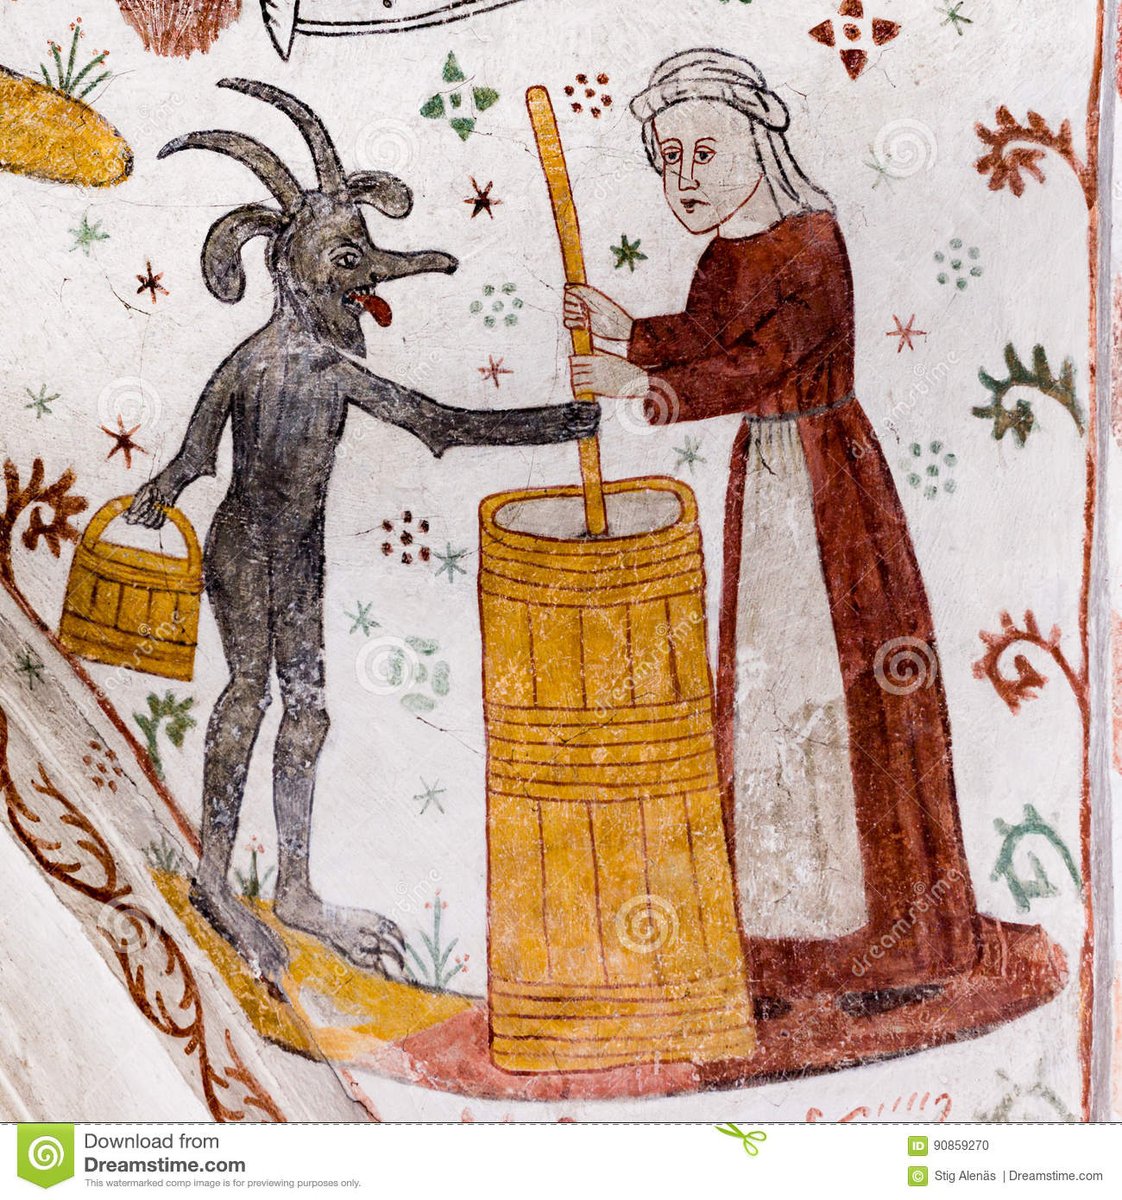 - In the high middle ages the Devil wasn't a dangerous cosmic force. It was more like a mischievous imp.In the medieval mega-best-seller Leggenda Aurea, basically life of saints, the devil is dimwitted and ridicolous, easily outsmarted by saints.Behold the Lord of Darkness!